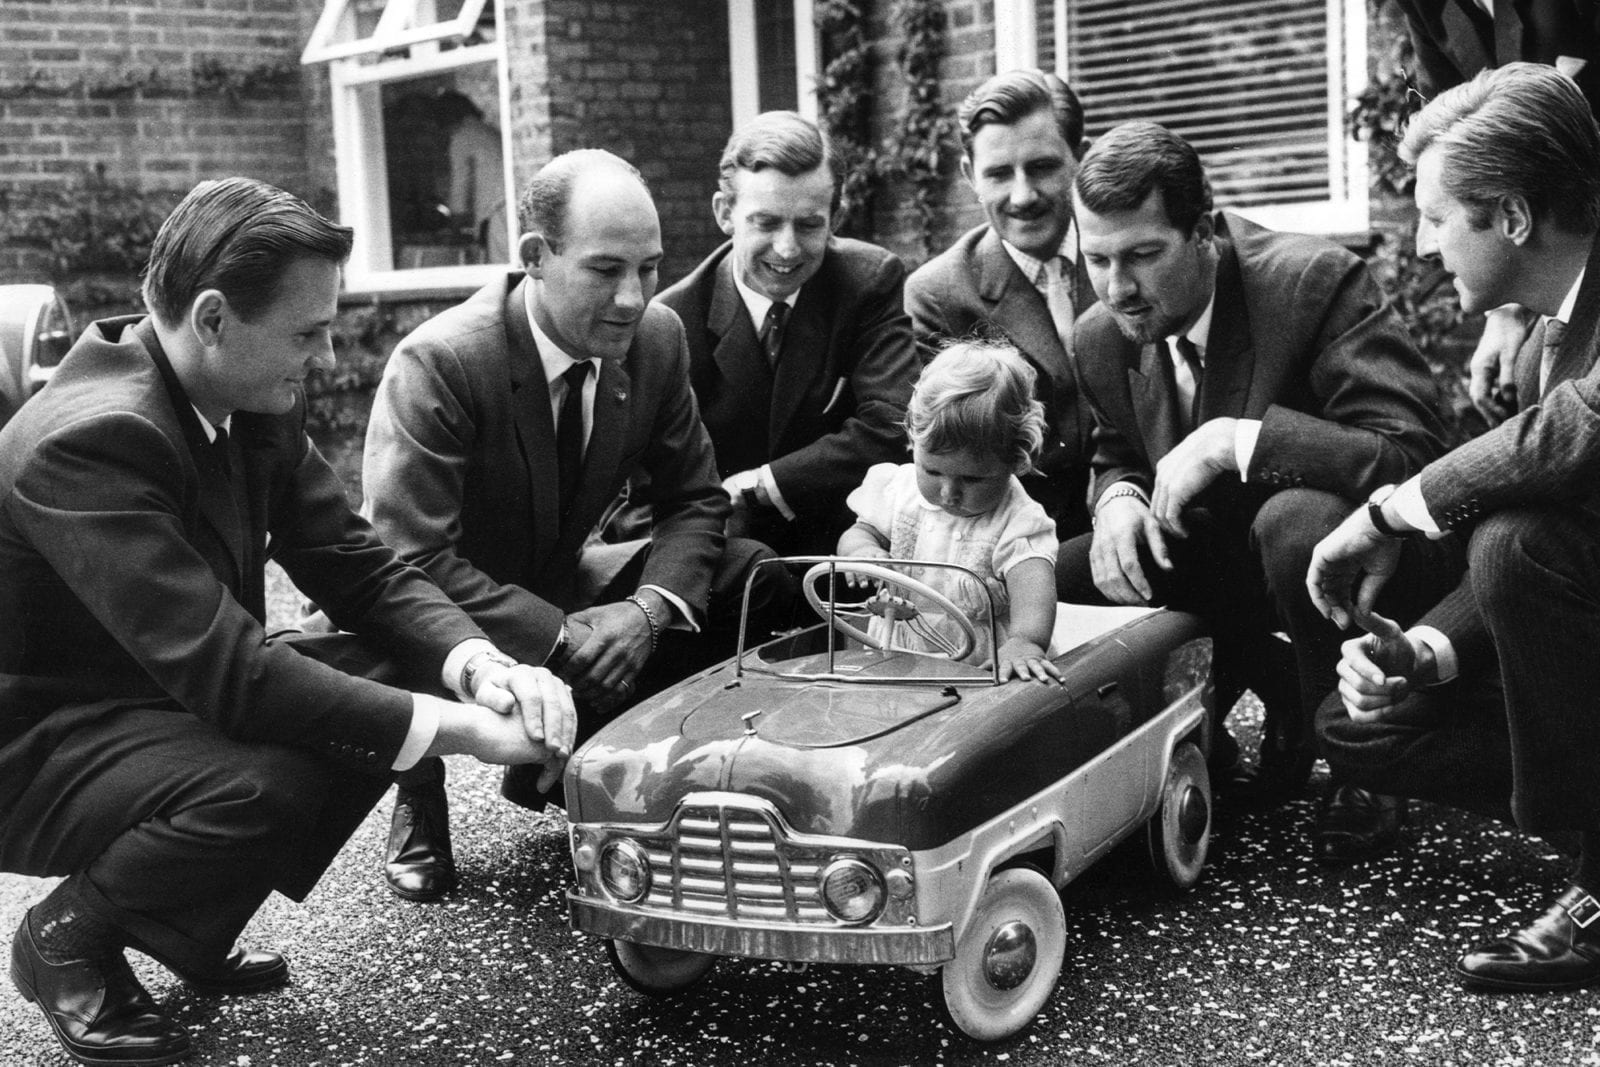 A young Damon Hill in a toy car with Bruce McLaren Stirling Moss Tony Brooks Graham Hill Jo Bonnier and Wolfgang von Trips